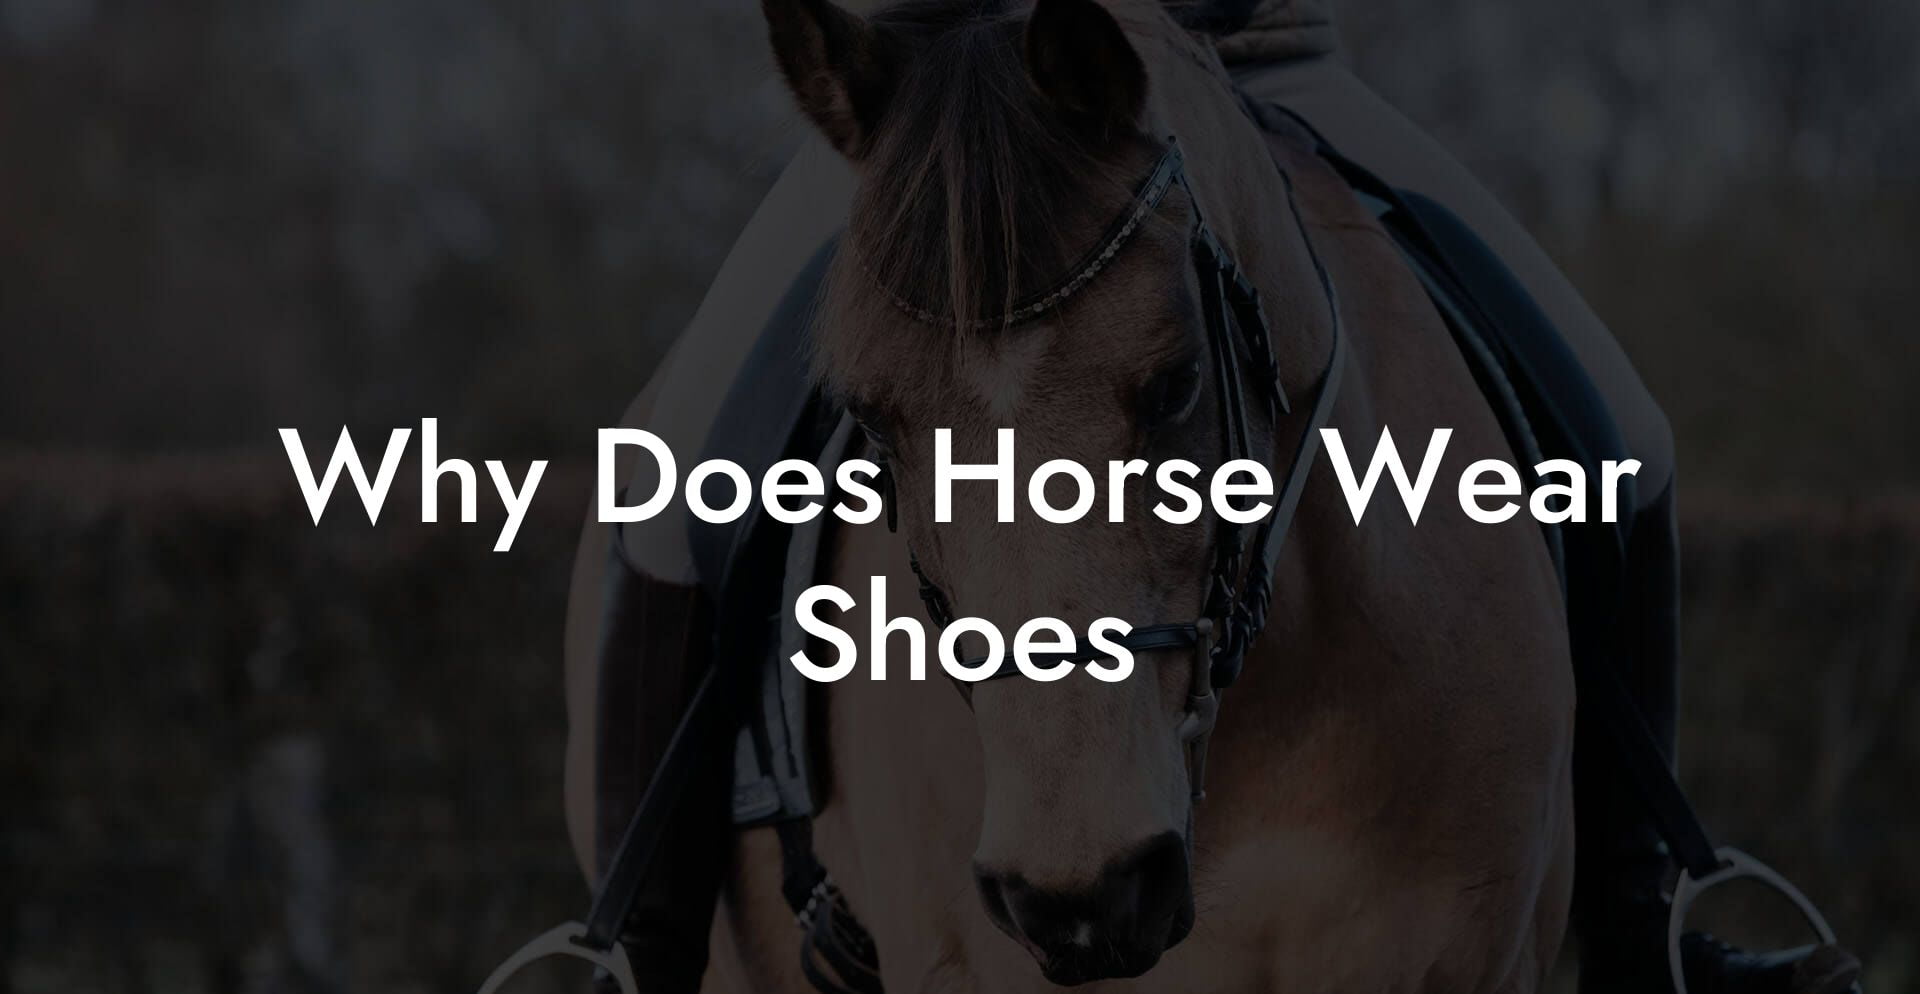 Why Does Horse Wear Shoes